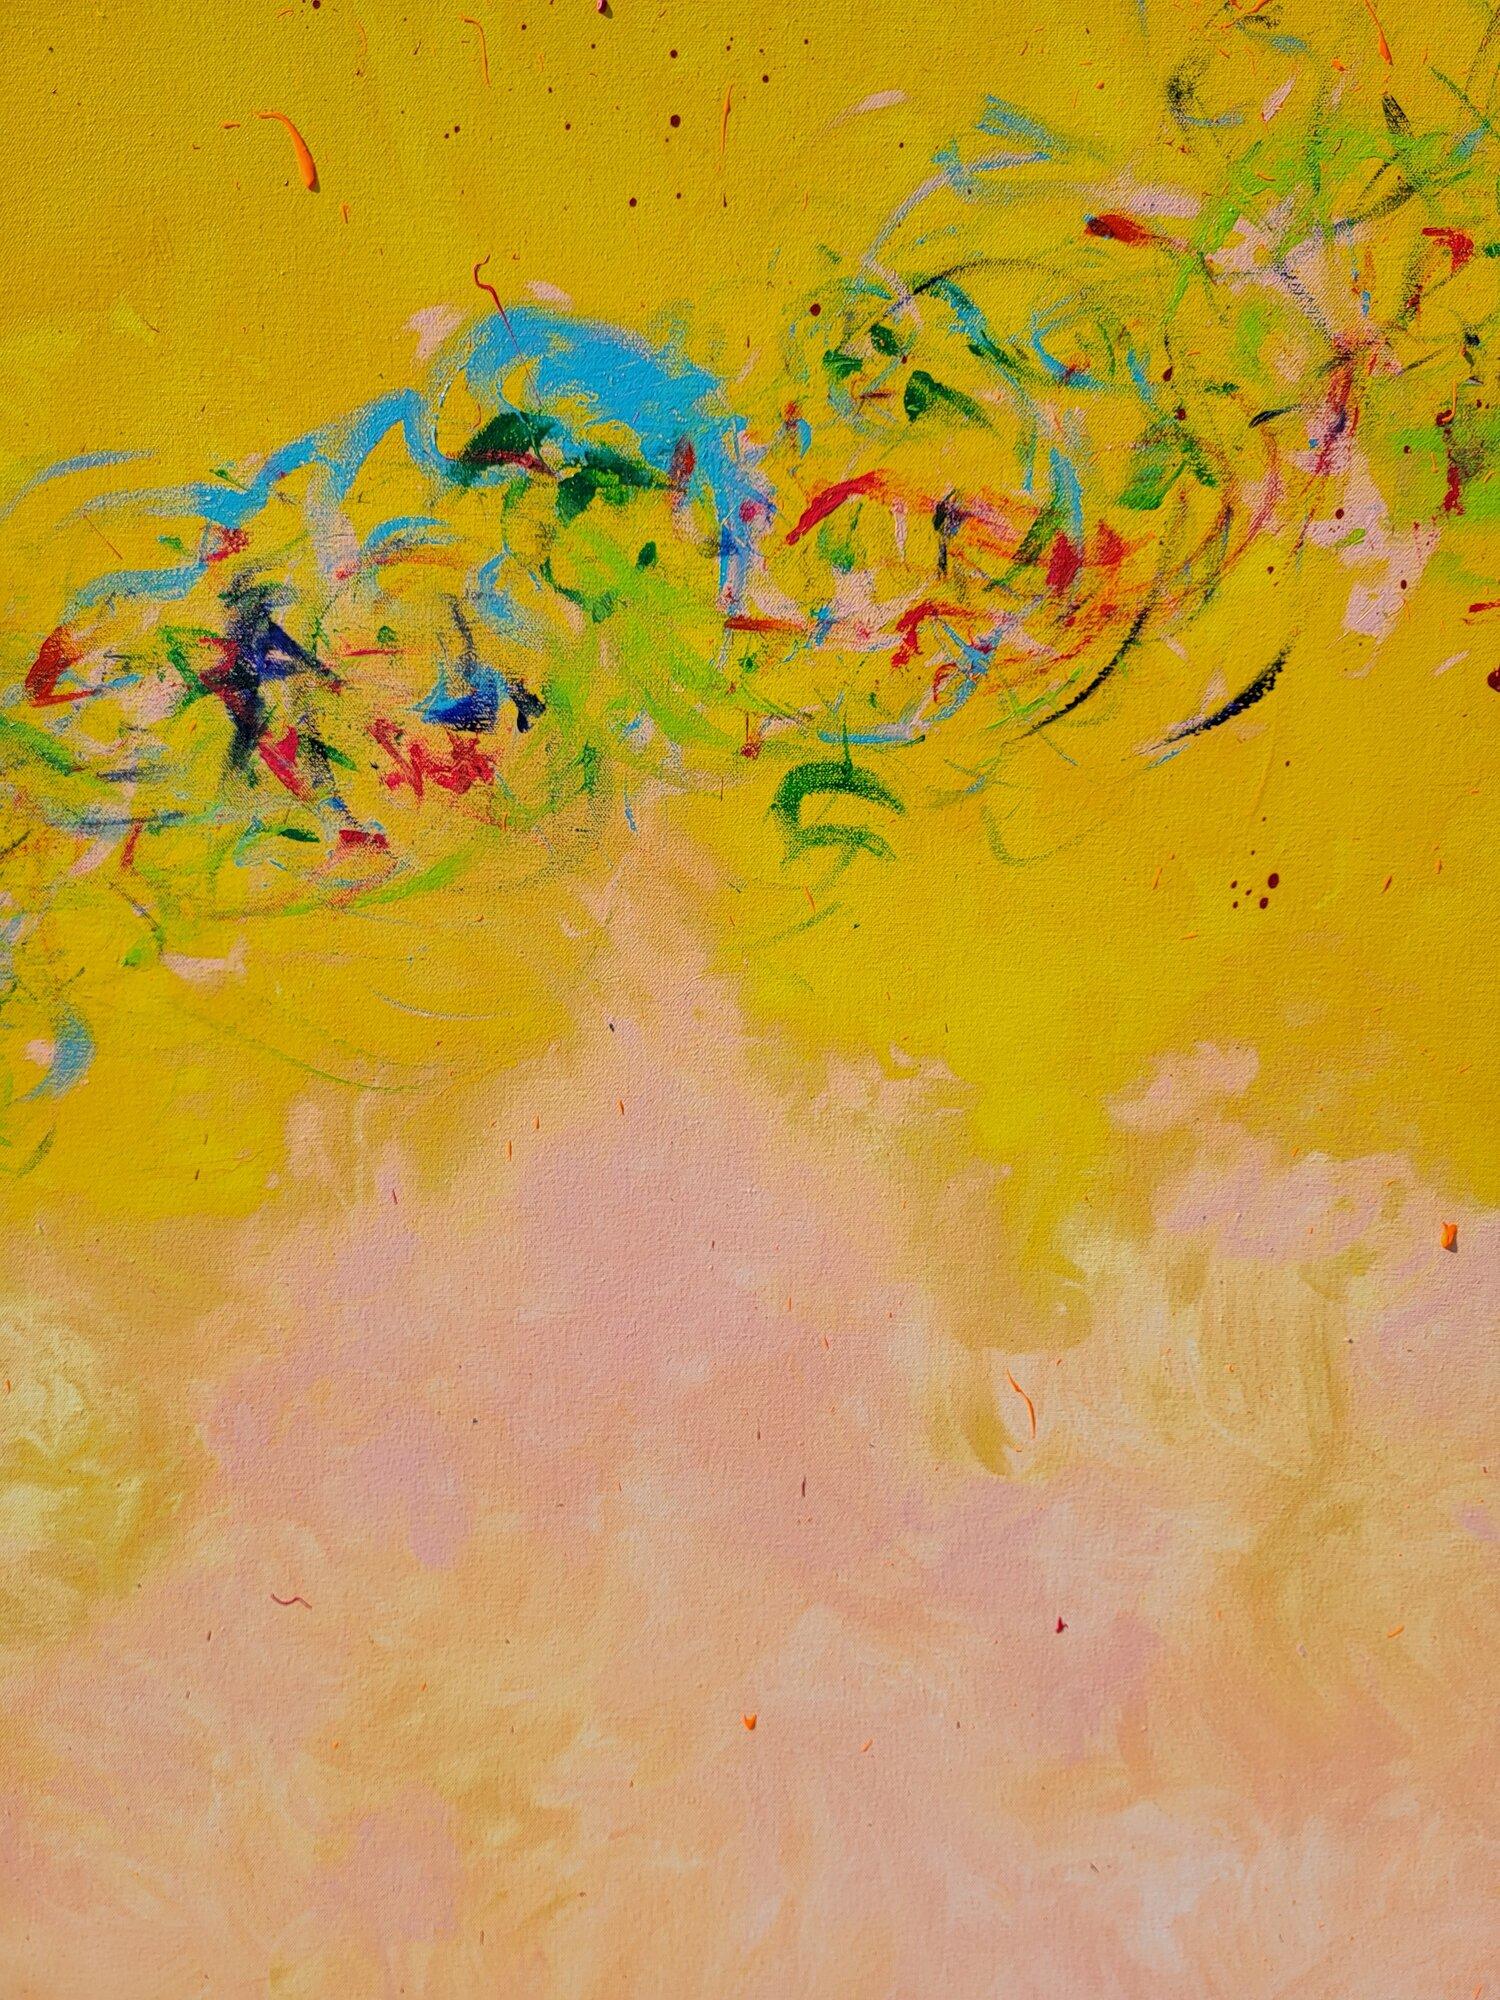 A Bright Momentum, Abstract Contemporary Acrylic Painting on Panel
This is a finger painted, original painting. 
Created in Los Angeles, CA 
Professional grade acrylic paint on wood panel
Ready to hang with wires and D ring
Signed on the back